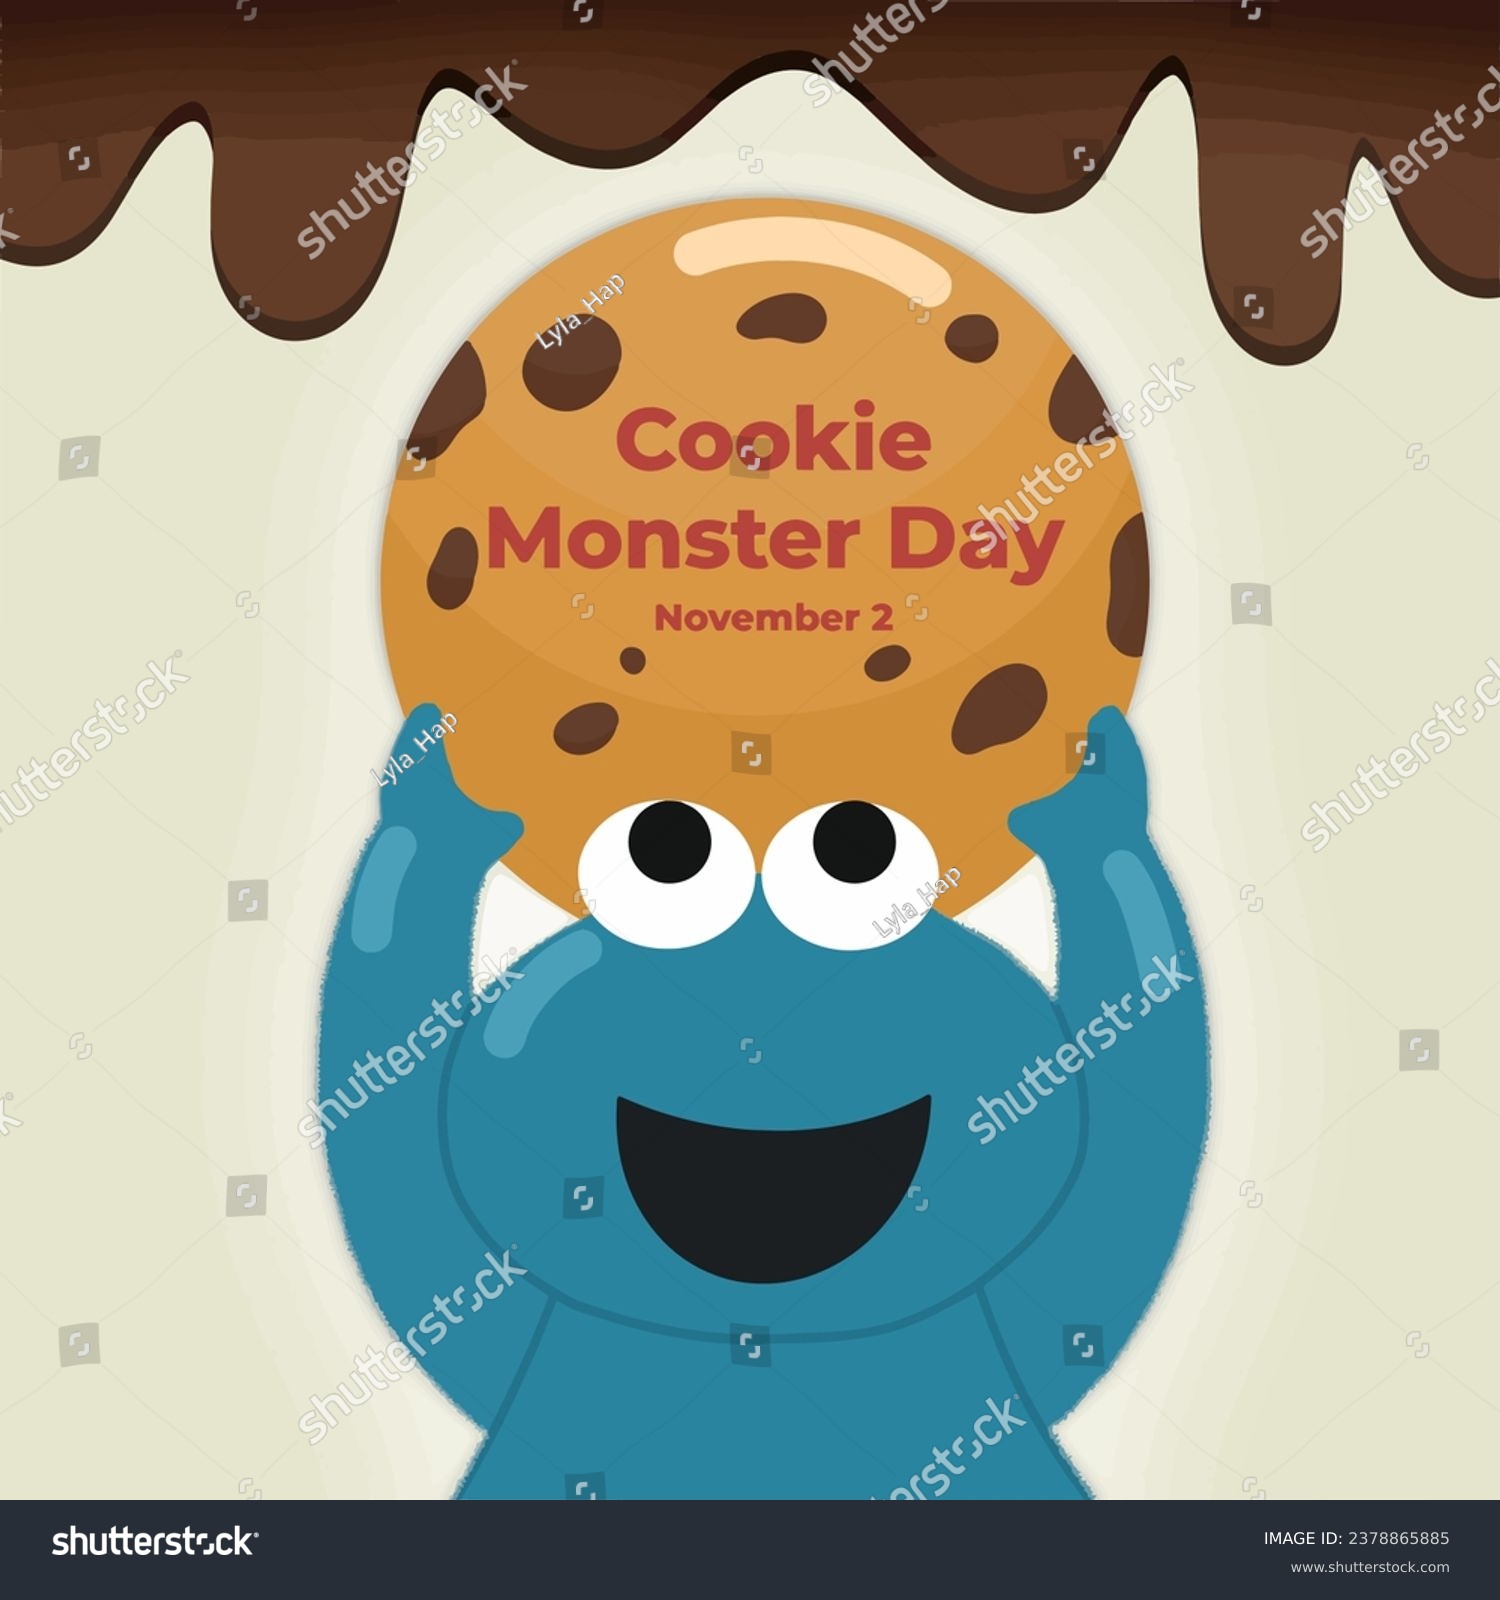 SVG of Monster lifting the cookie. Cookie Monster day vector illustration
 svg